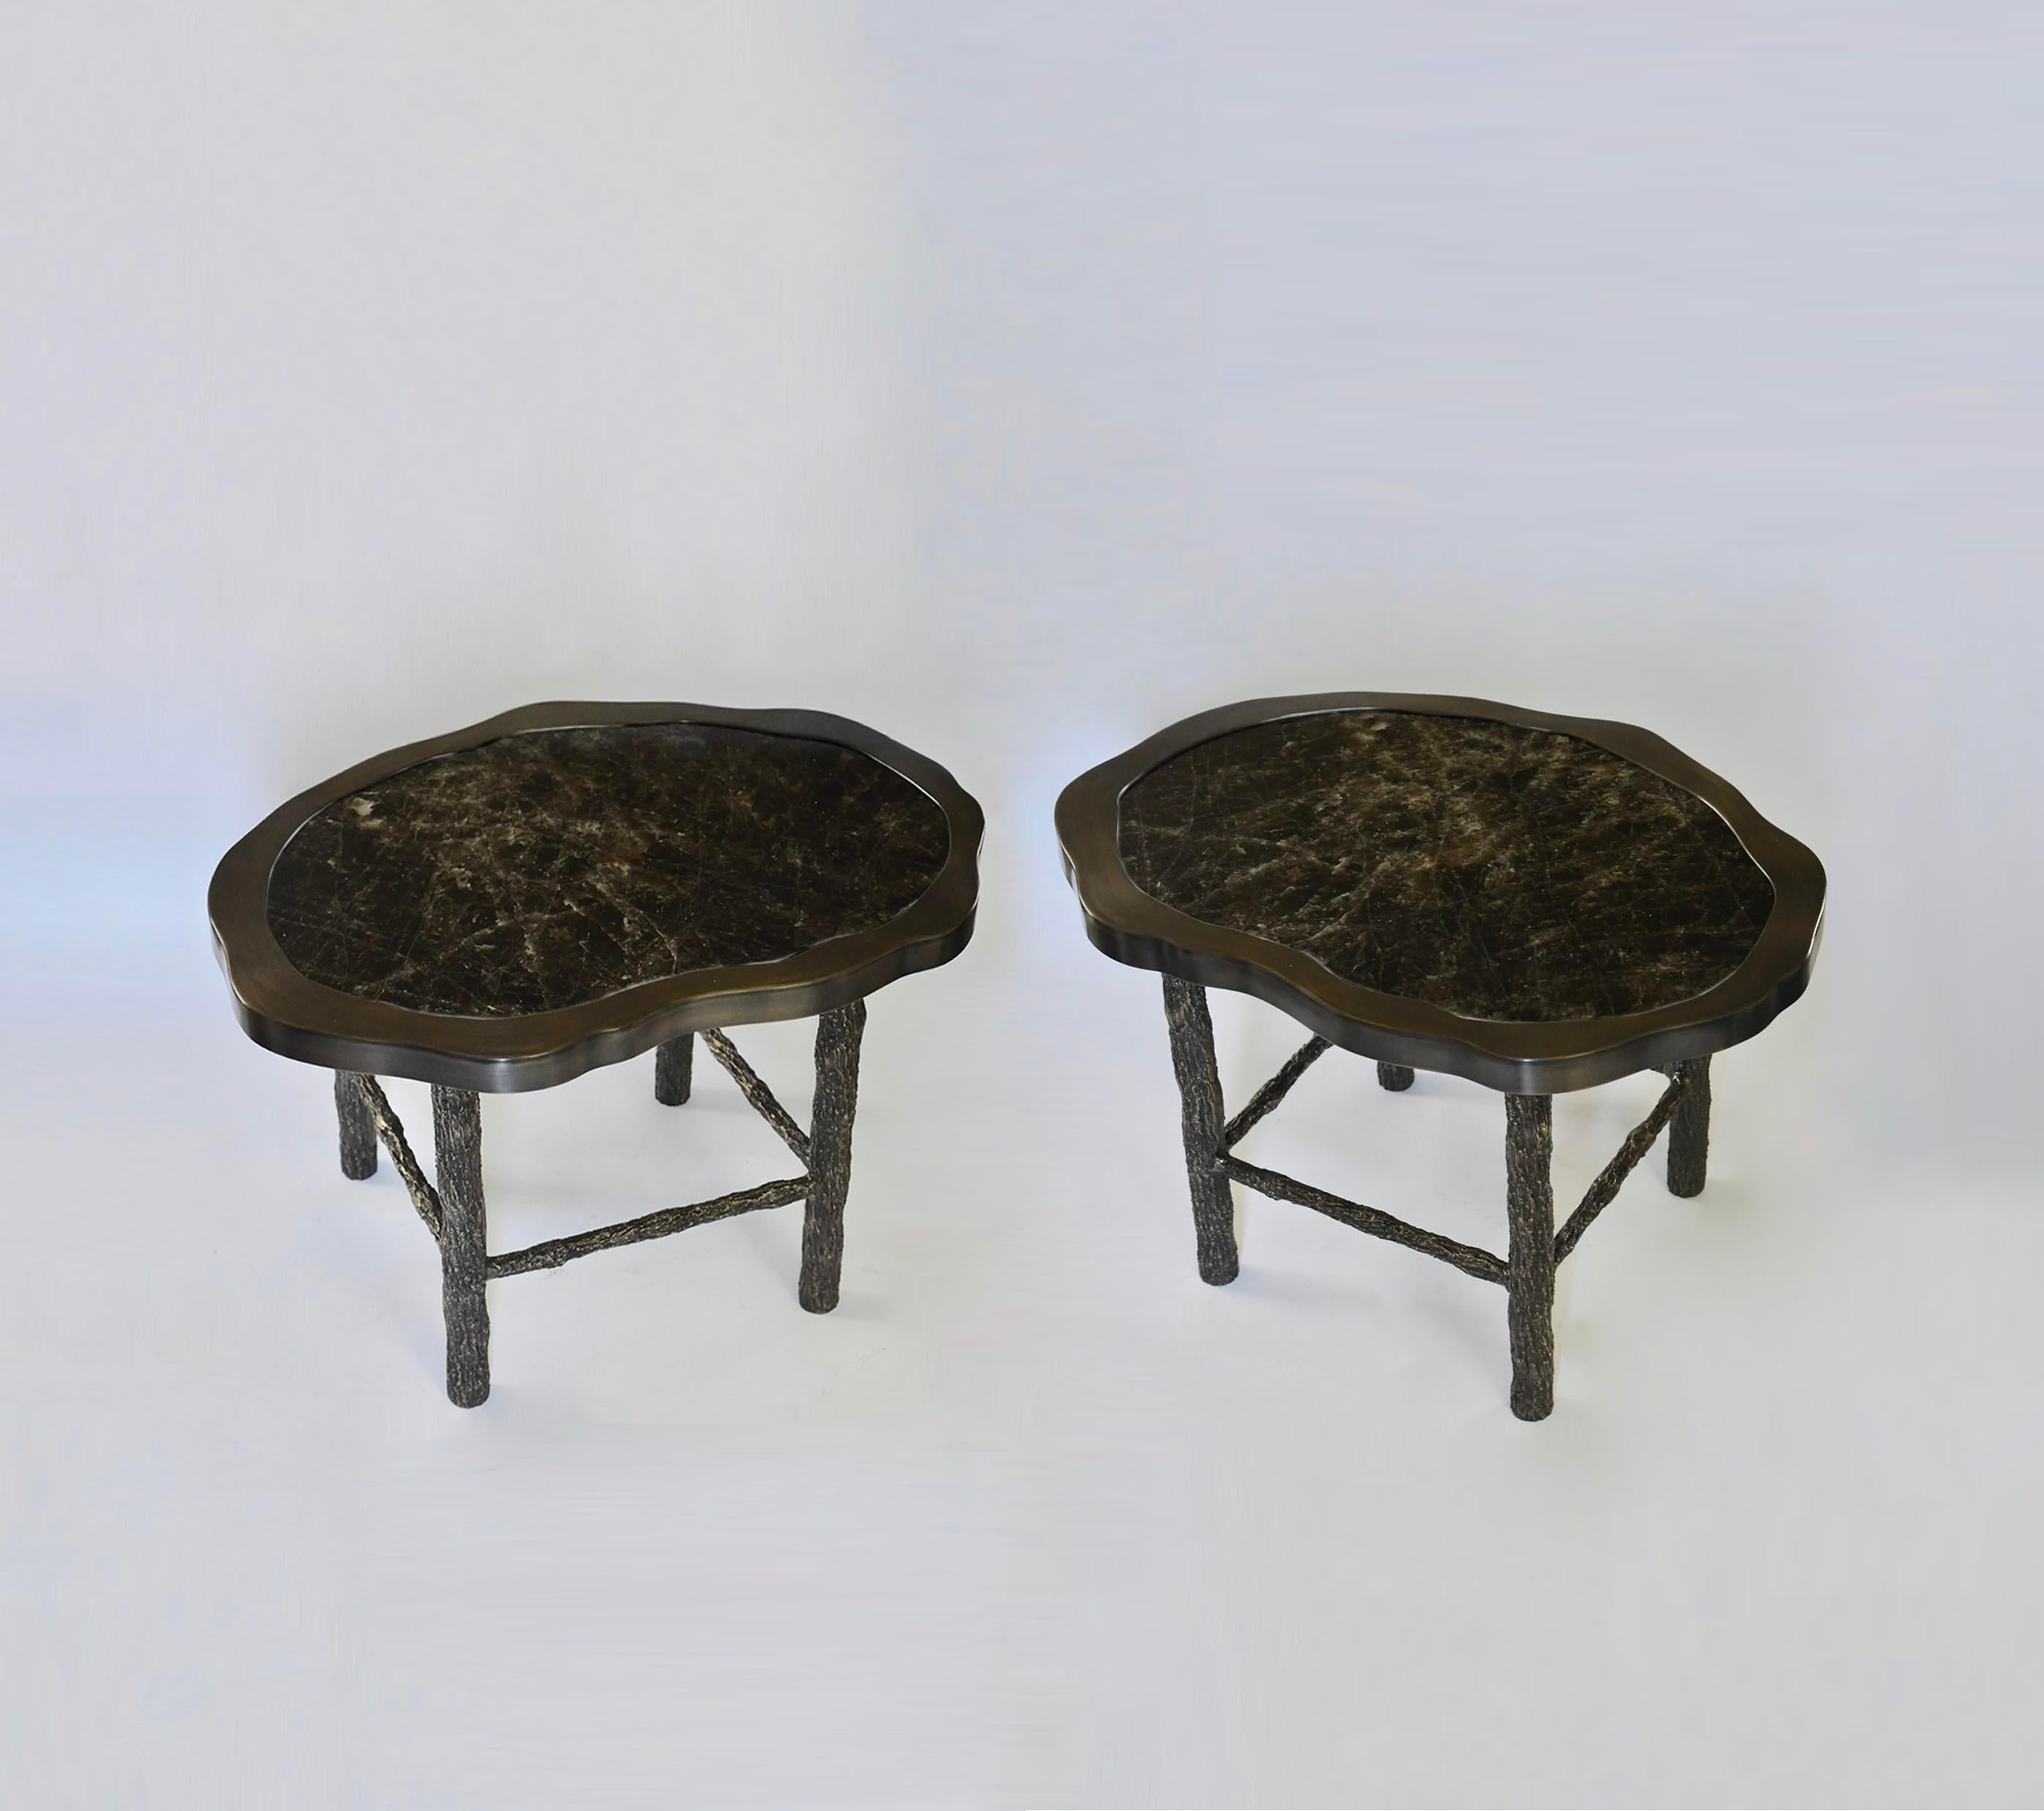 Pair of smoky dark rock crystal quartz cocktail tables with twig inspired antique brass legs, created by Phoenix Gallery.
Can be sold by separate.
Custom size upon request.